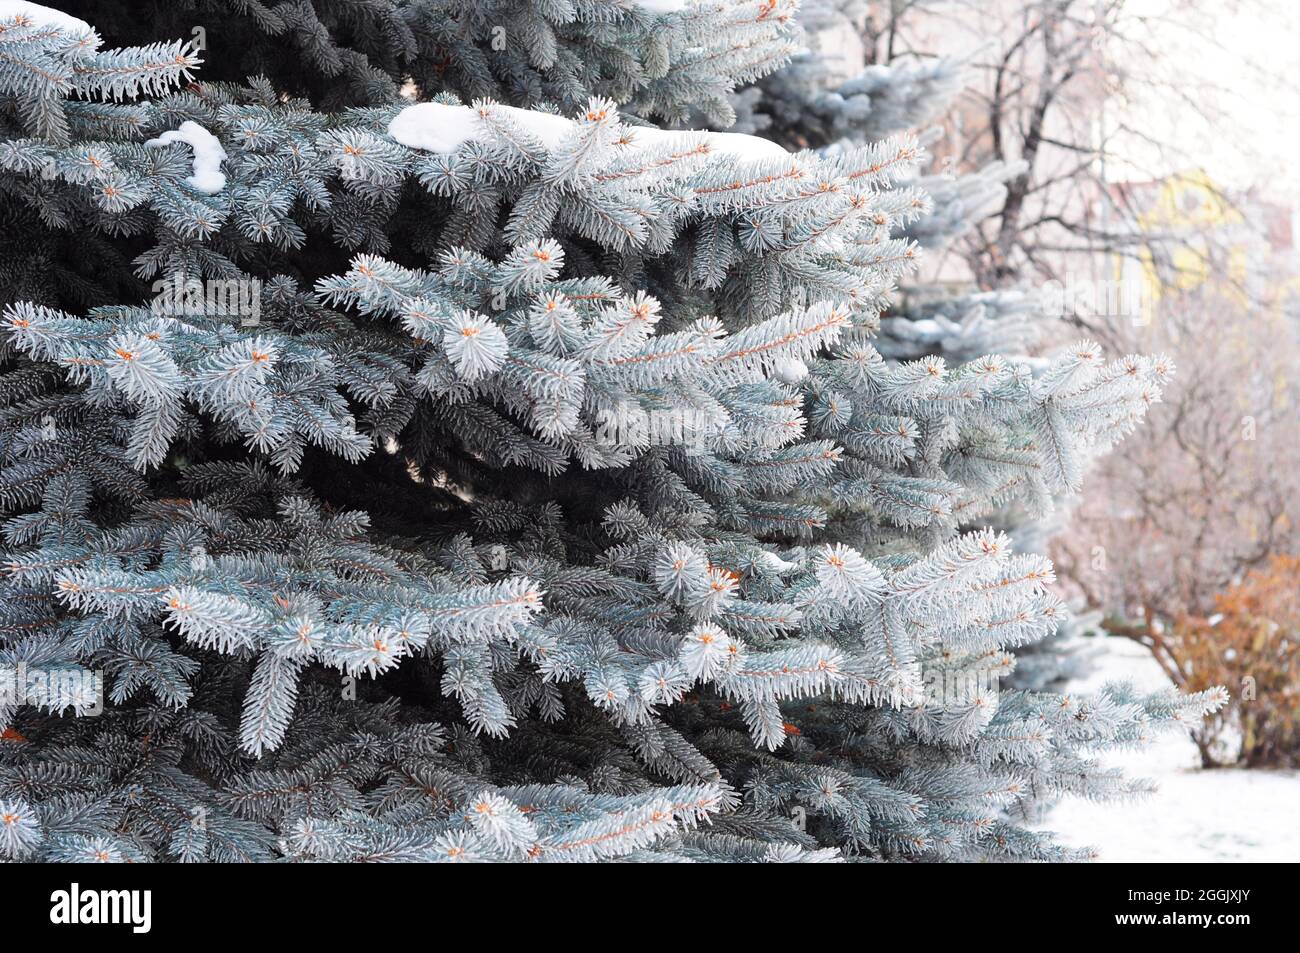 Blue spruce, white spruce with the scientific name Picea pungens, is a species of spruce tree in winter, covered with snow. Stock Photo